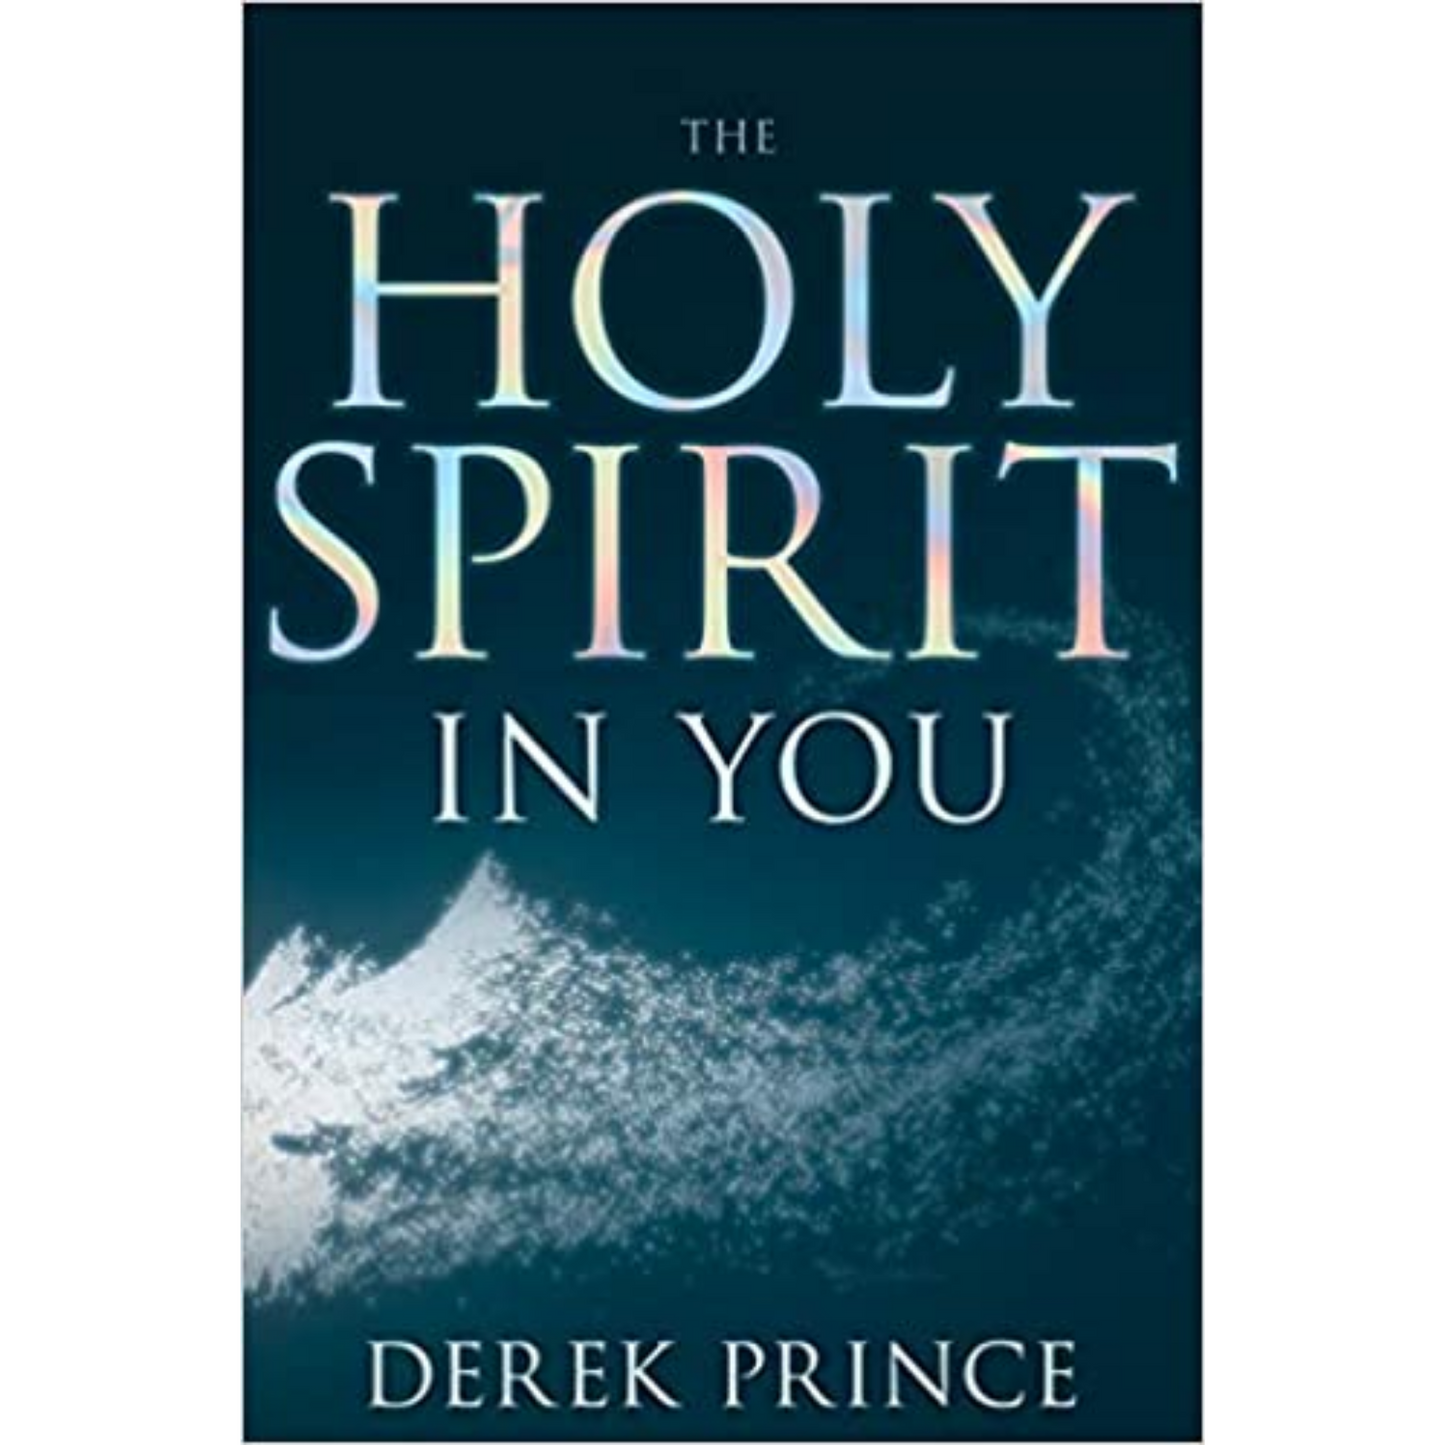 Holy Spirit in You (Expanded Edition)